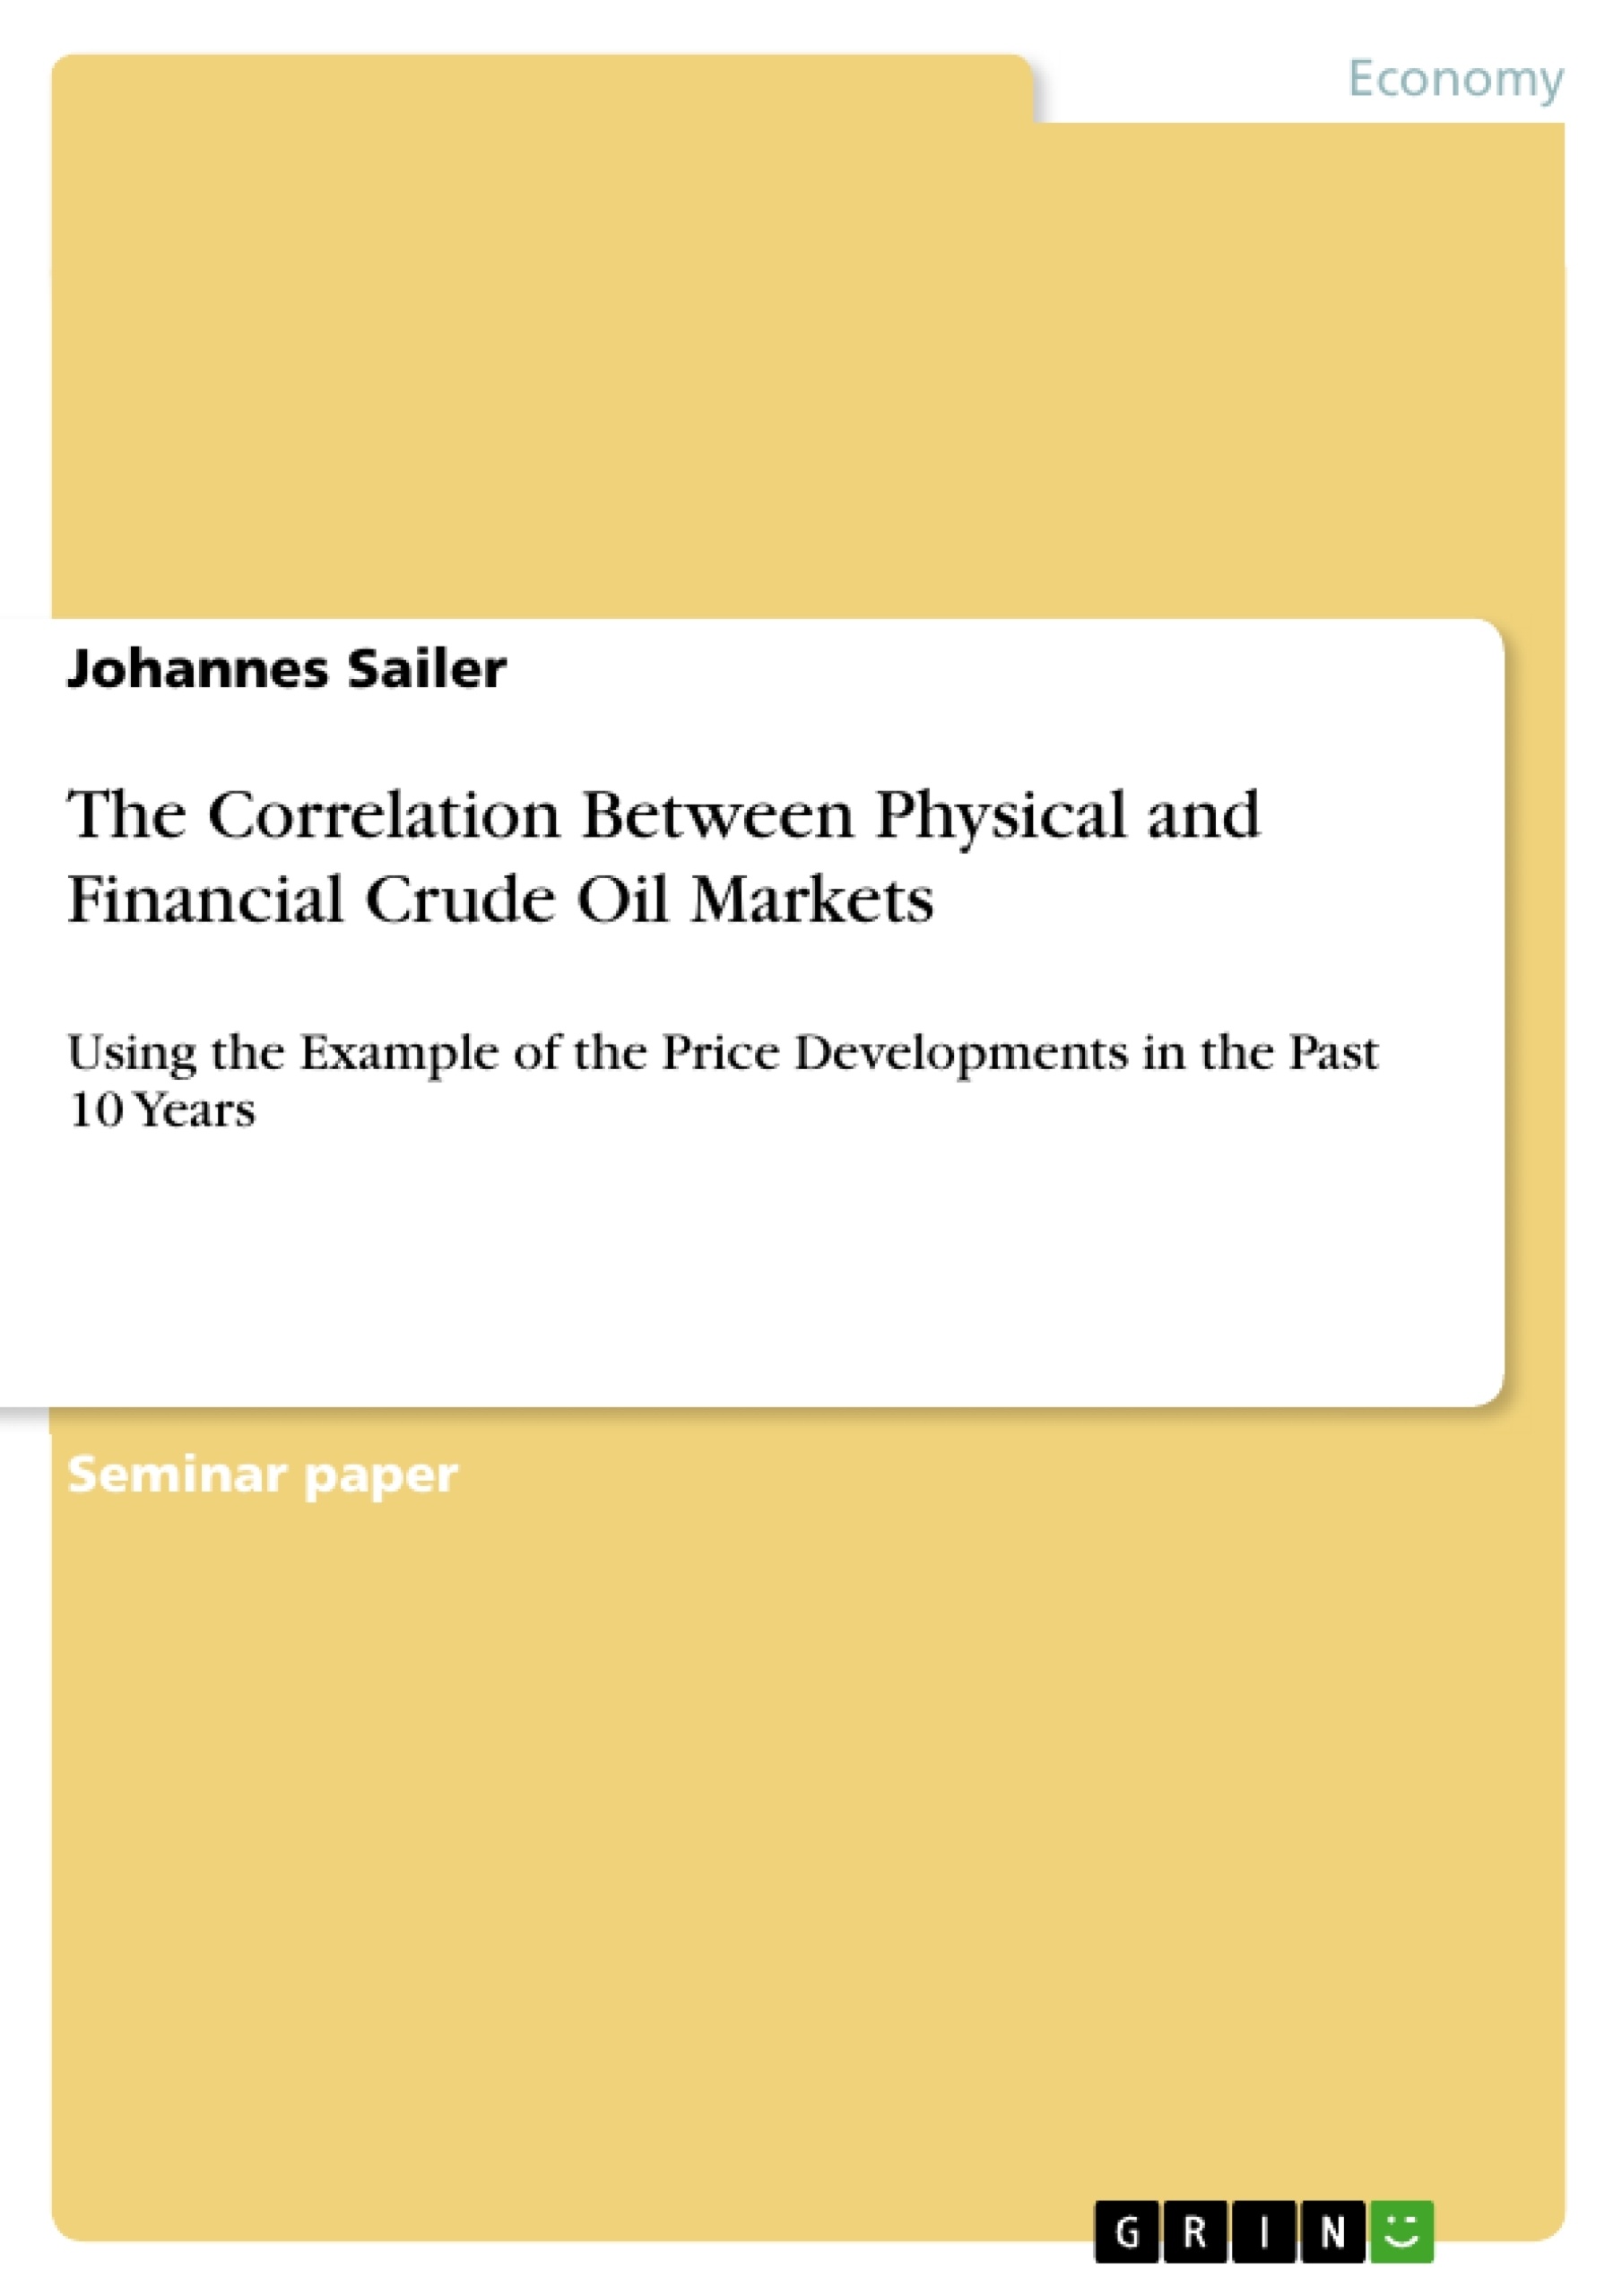 Titre: The Correlation Between Physical and Financial Crude Oil Markets